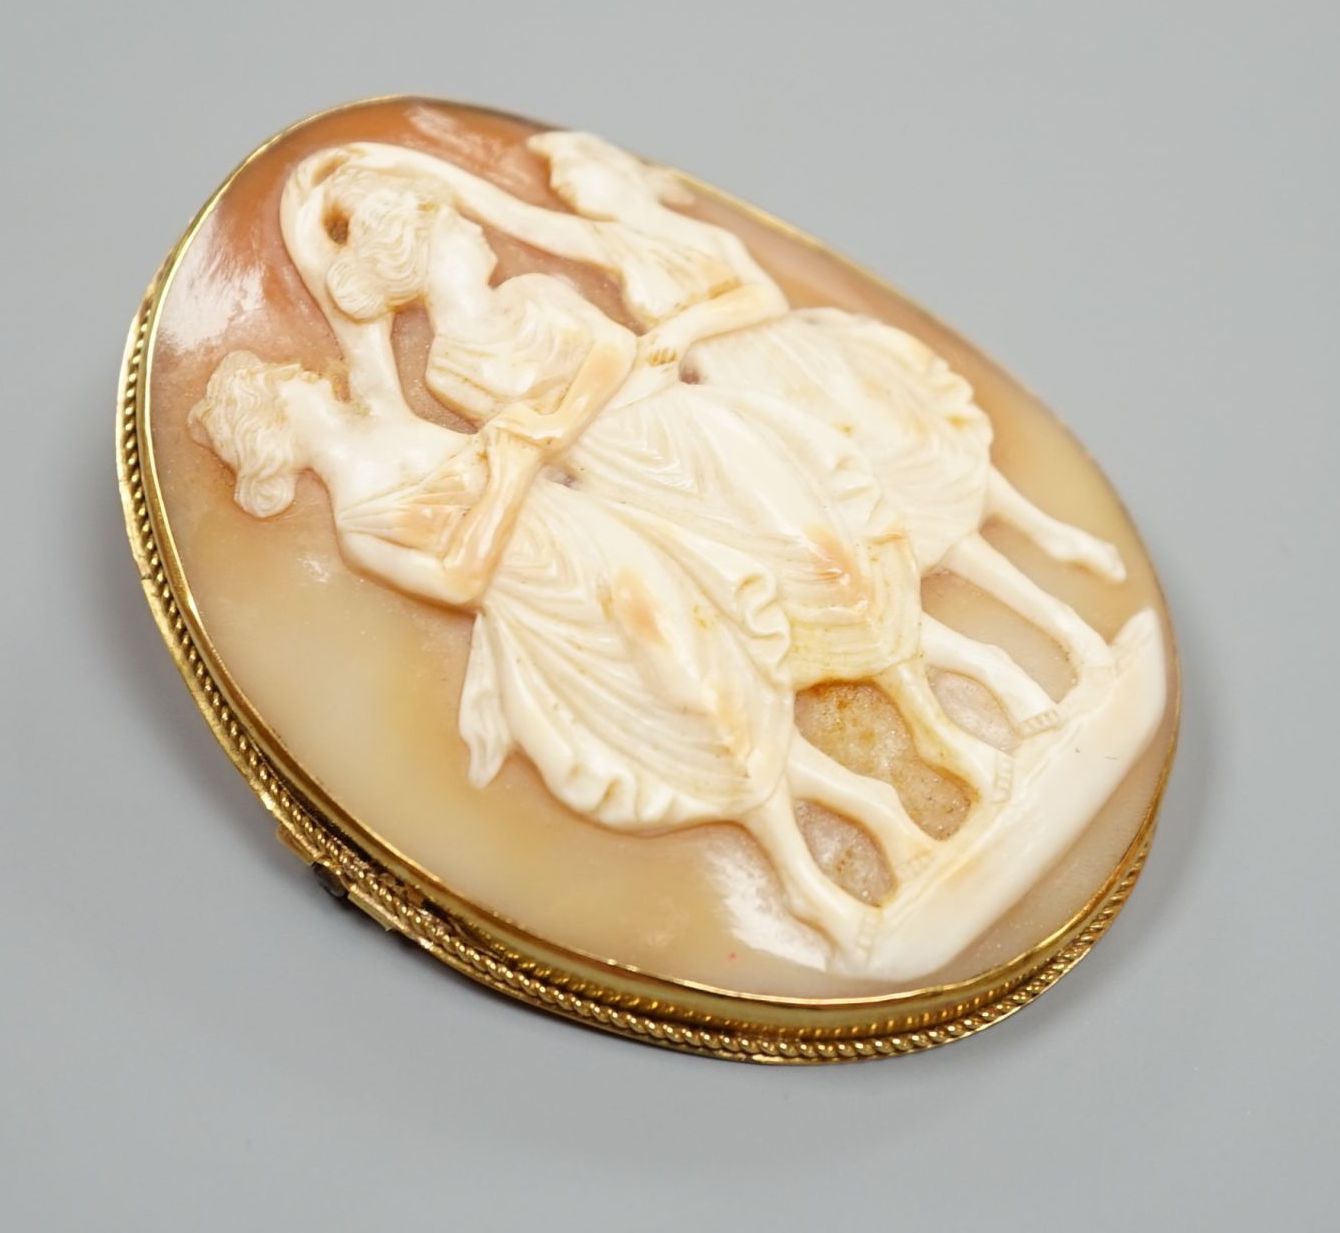 A yellow metal mounted oval cameo shell pendant brooch, carved with The Three Graces, 62mm, gross weight 21.4 grams.